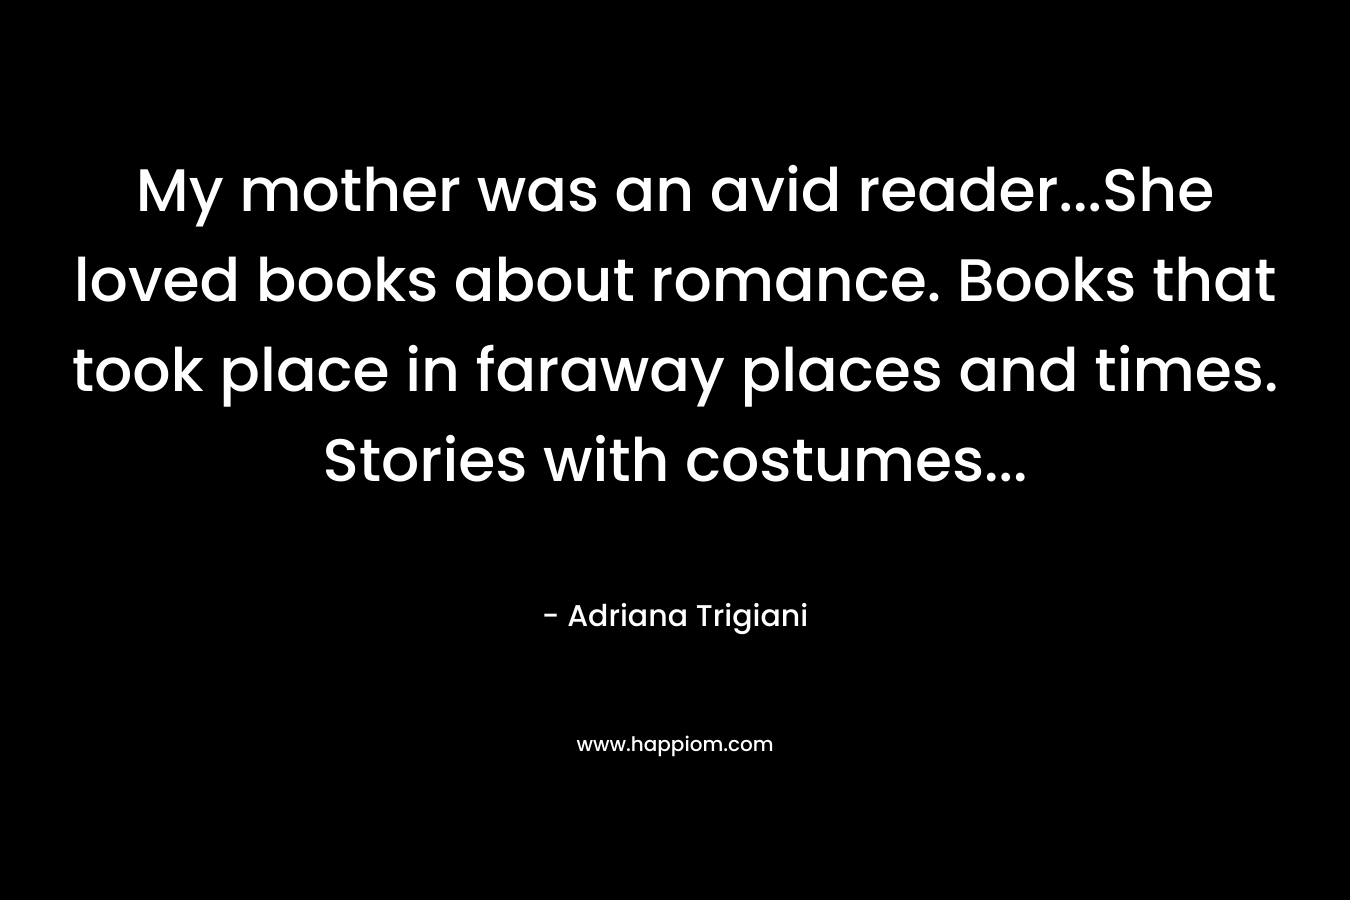 My mother was an avid reader...She loved books about romance. Books that took place in faraway places and times. Stories with costumes...